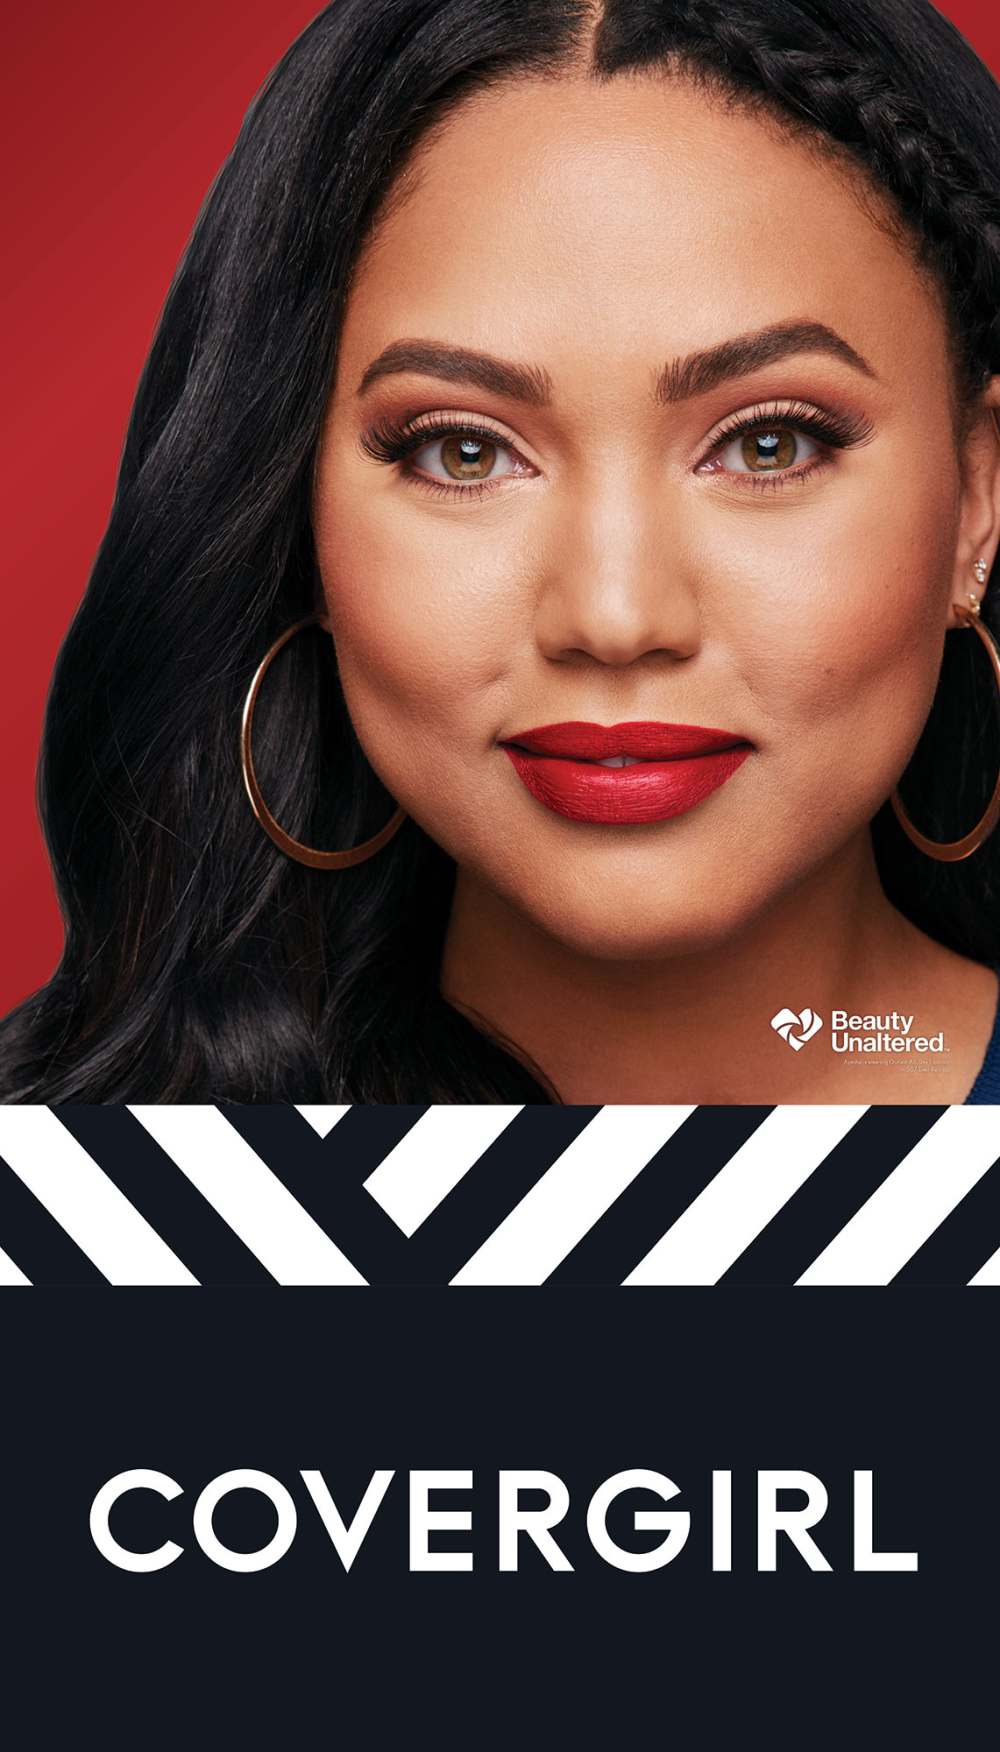 Ayesha Curry Joins Forces With CVS and Tells Us Why Being Authentic Is Important to Her